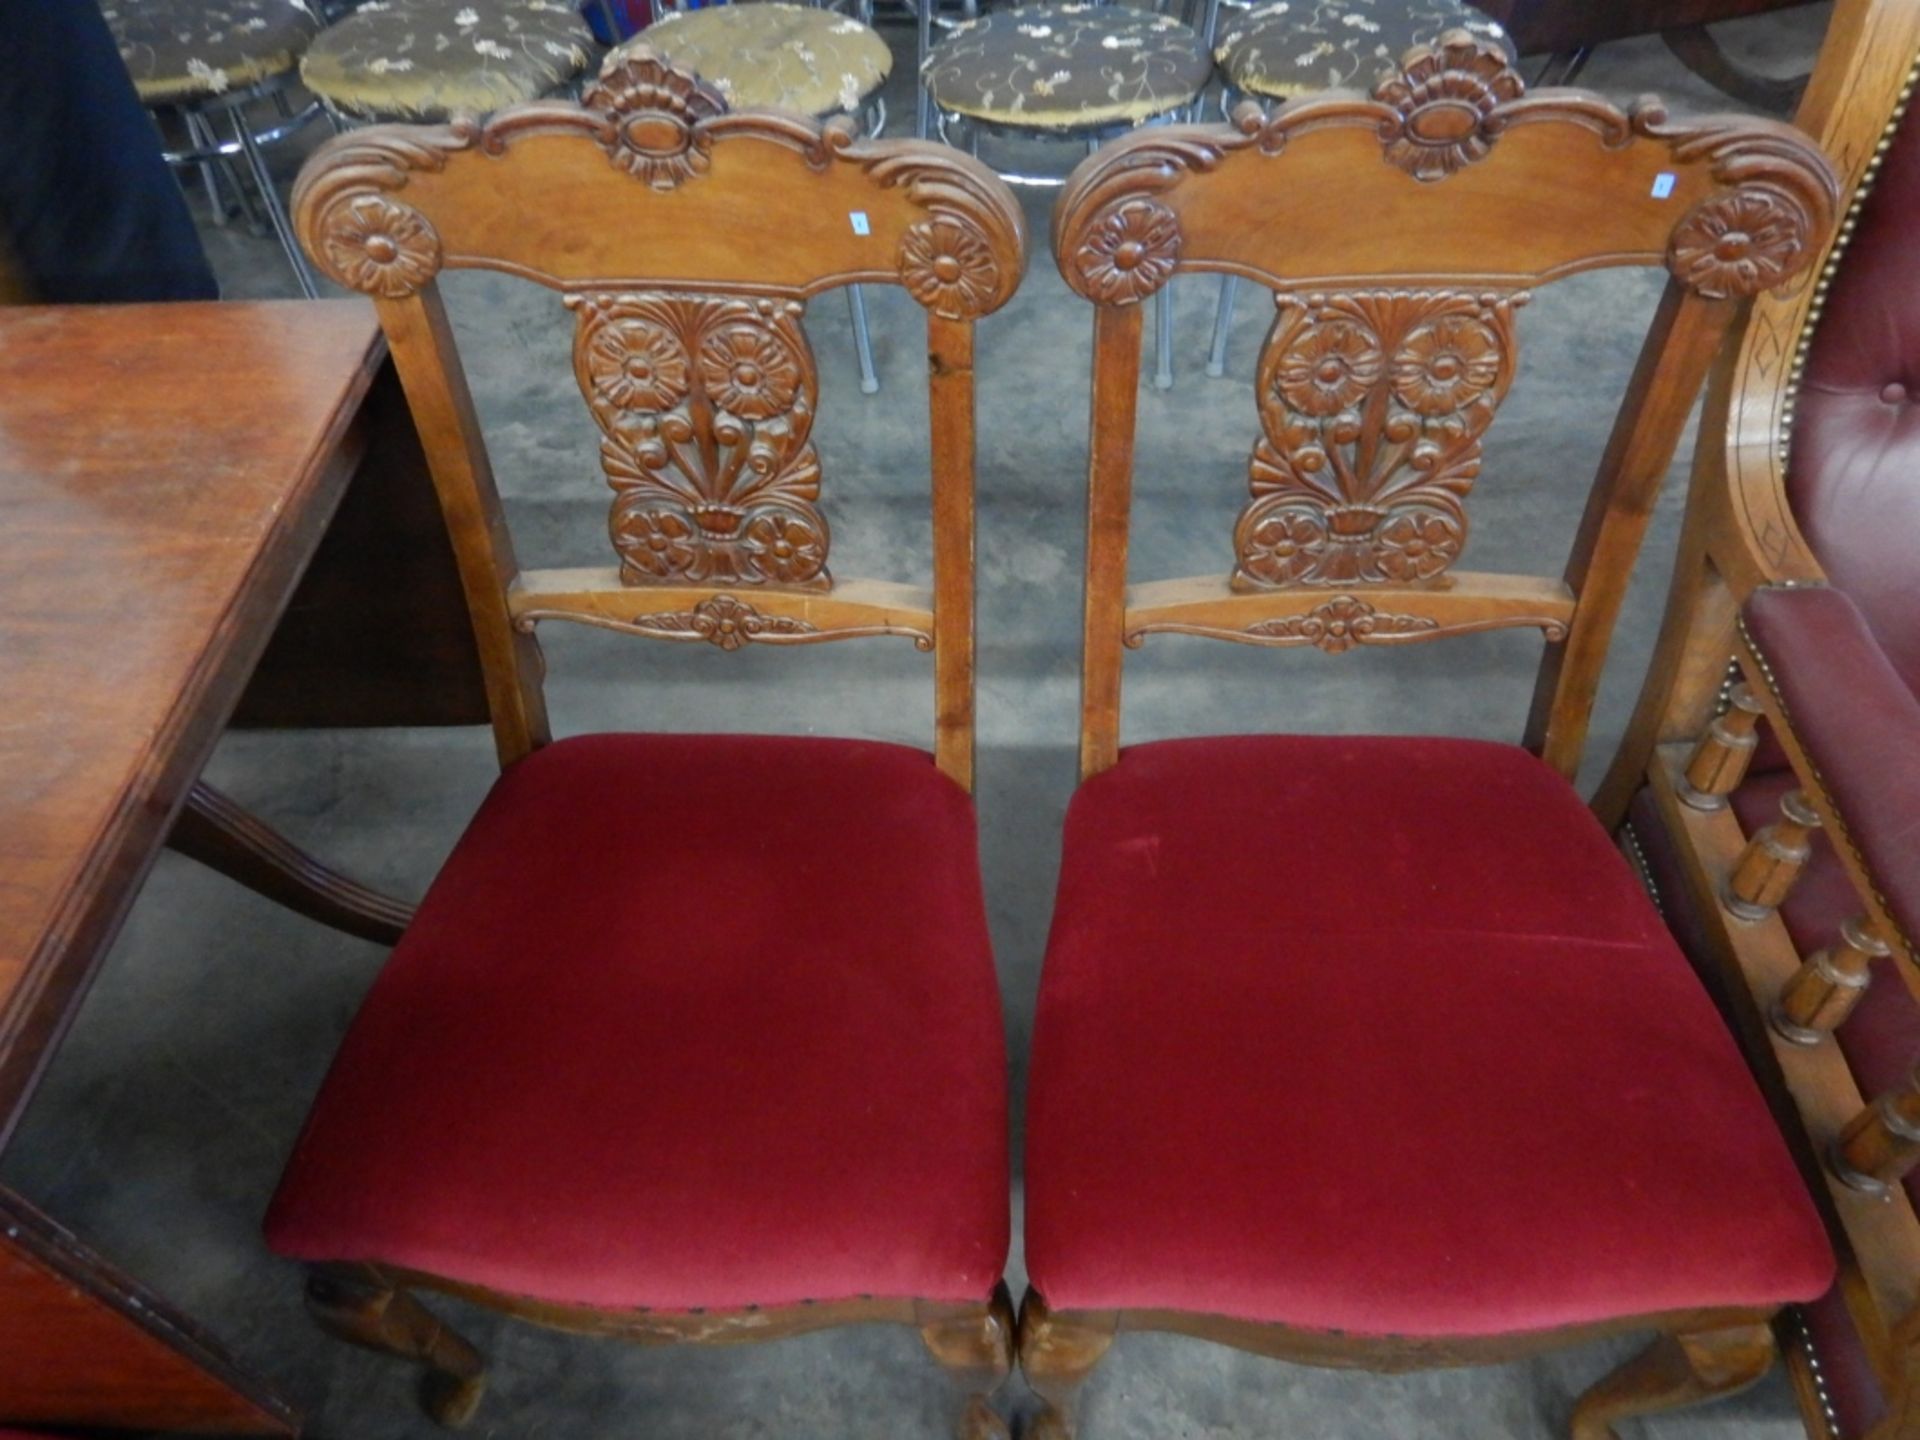 ANTIQUE DUNCAN PHYFE STYLE DROP LEAF TABLE AND CHAIRS (6) - Image 3 of 16